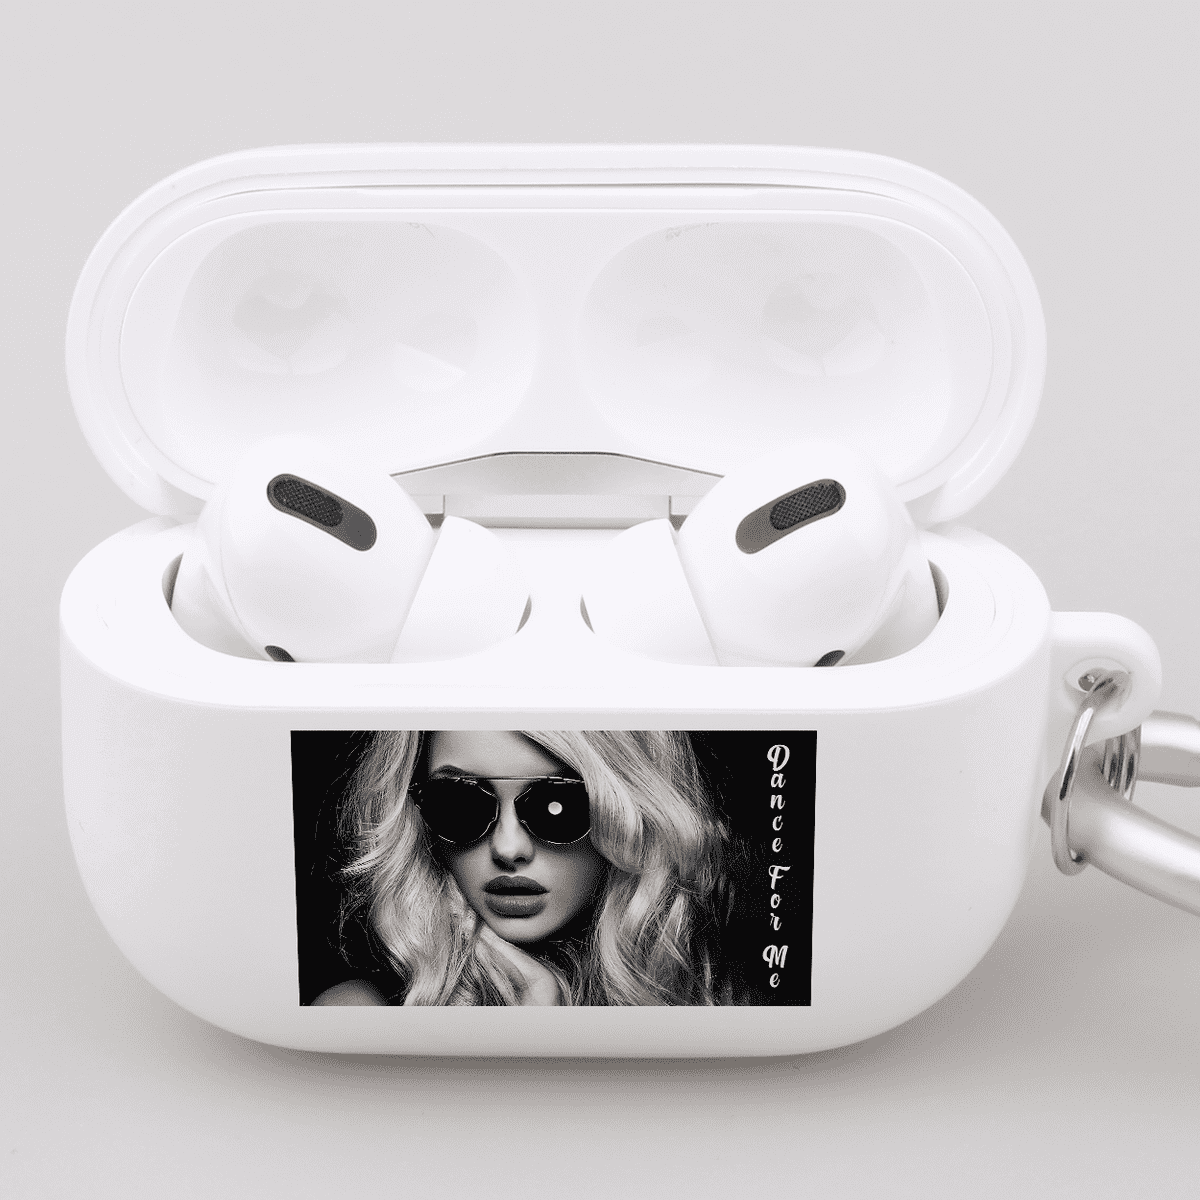 Custom Personalized Airpods Case for 1/2 Gen / Pro -Qstomize.com